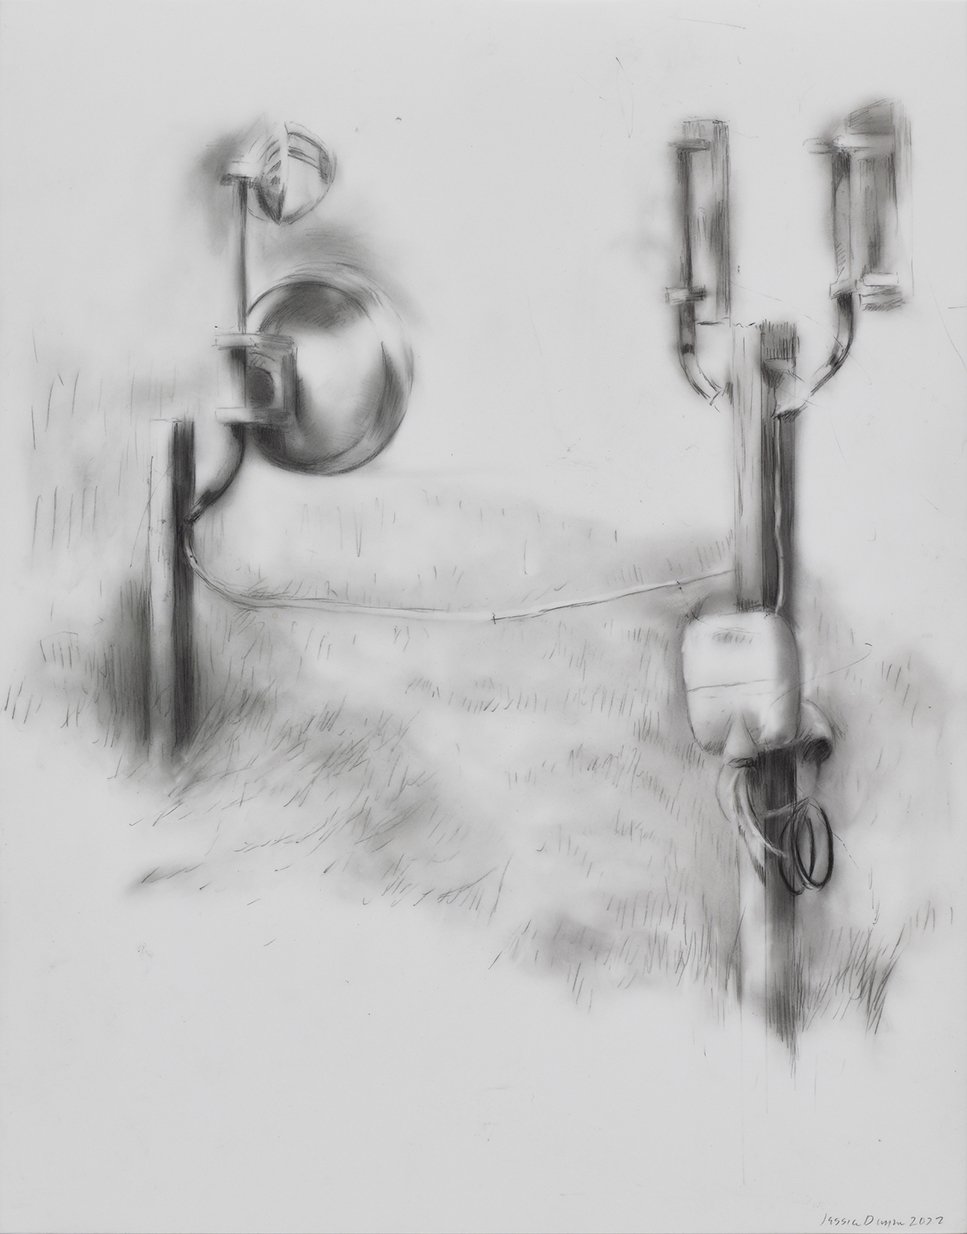   Dorland 5  2022 graphite on polyester 14 x 11 in. 